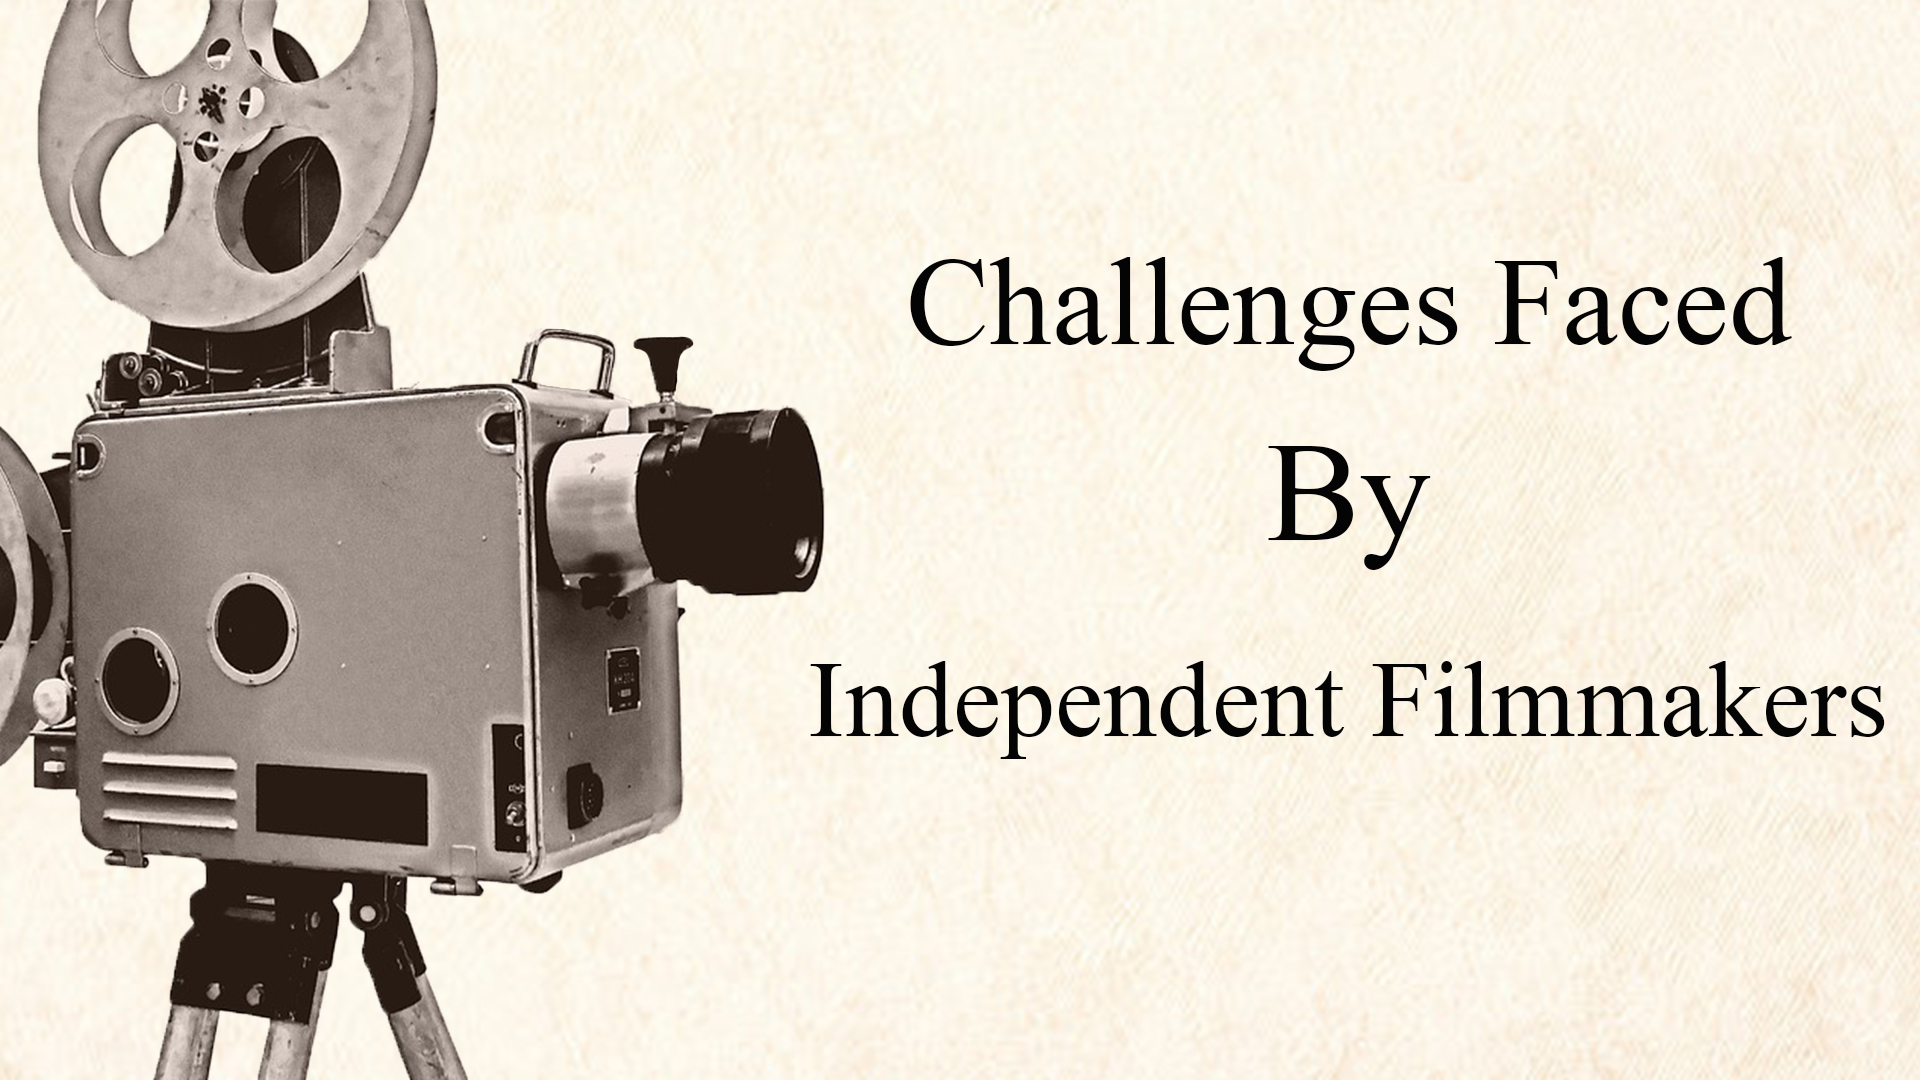 Some Significant Challenges Faced By Independent Film Makers